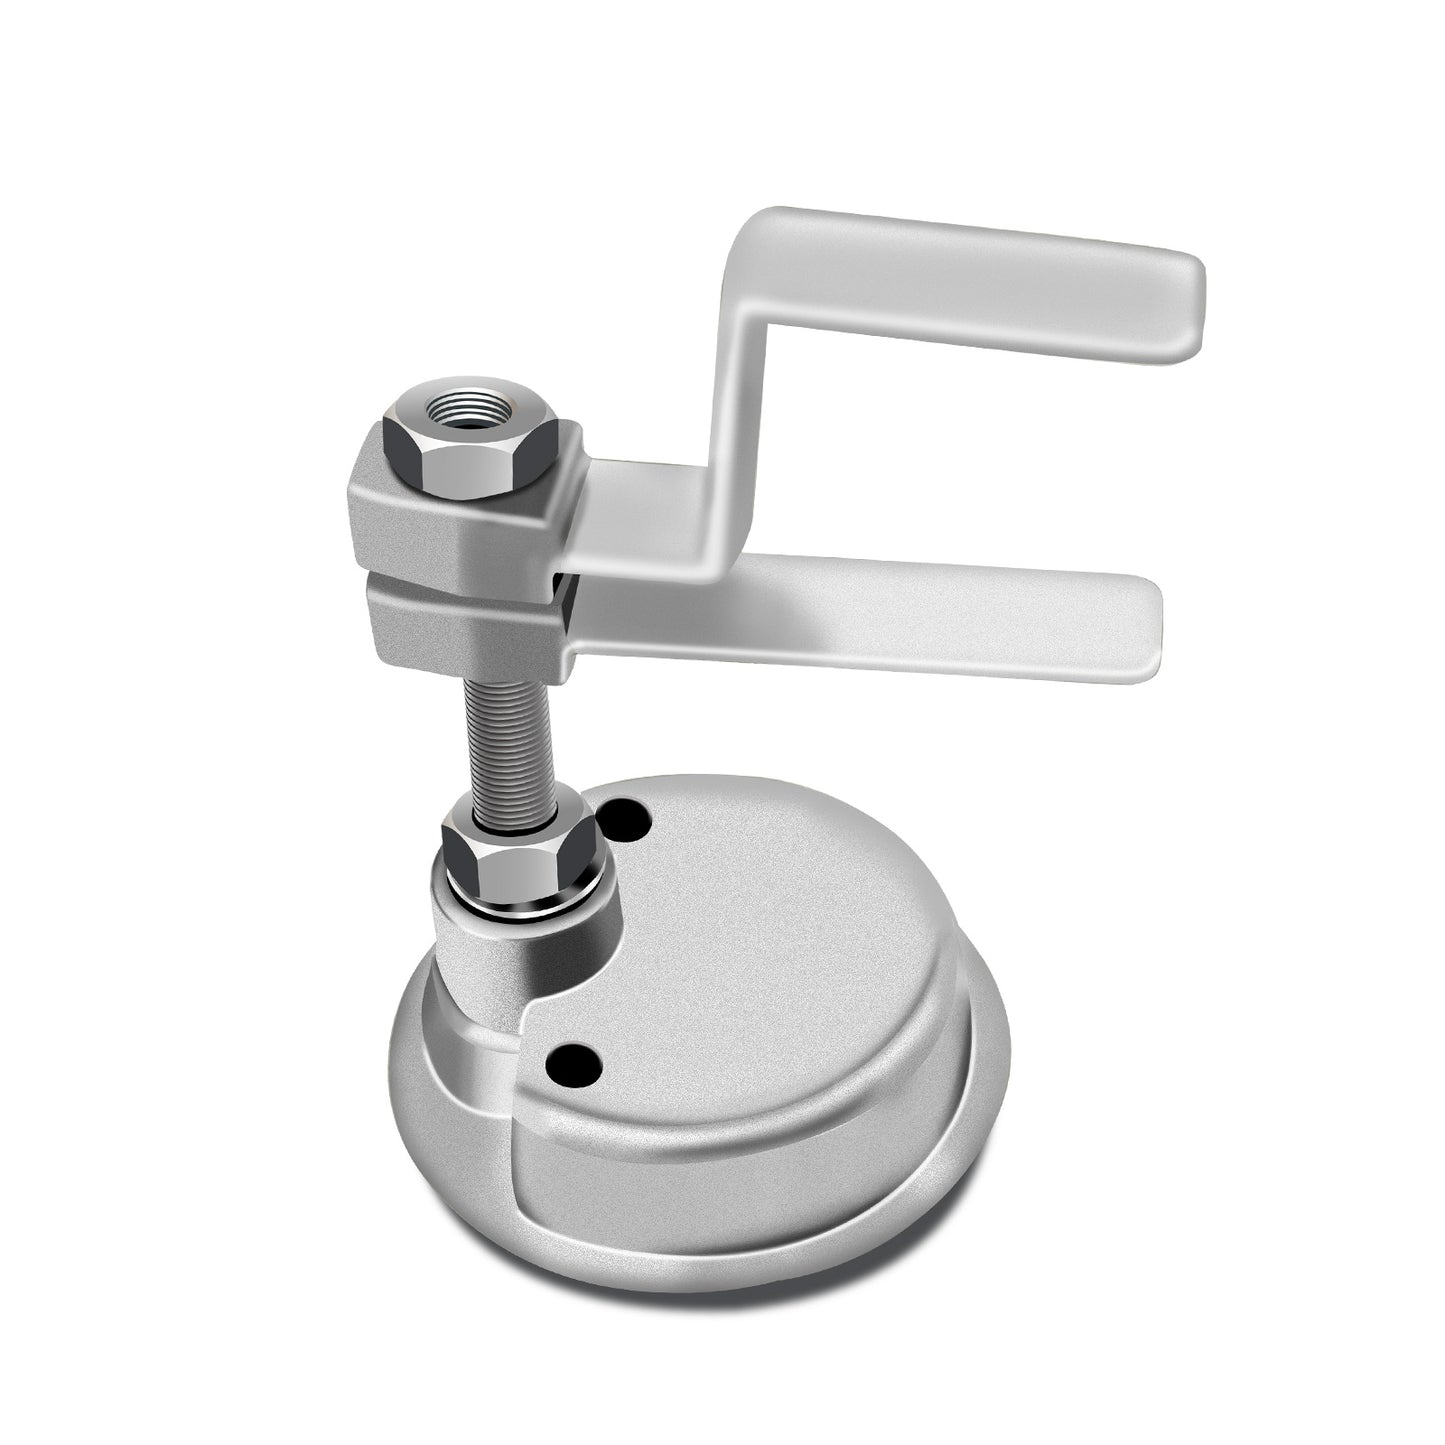 Nerites Boat Floor Buckle Hatch Latch Marine Grade 316 Stainless Steel Flush Turning Lift Handle Lock Style with 2 Keys and 2 Screws